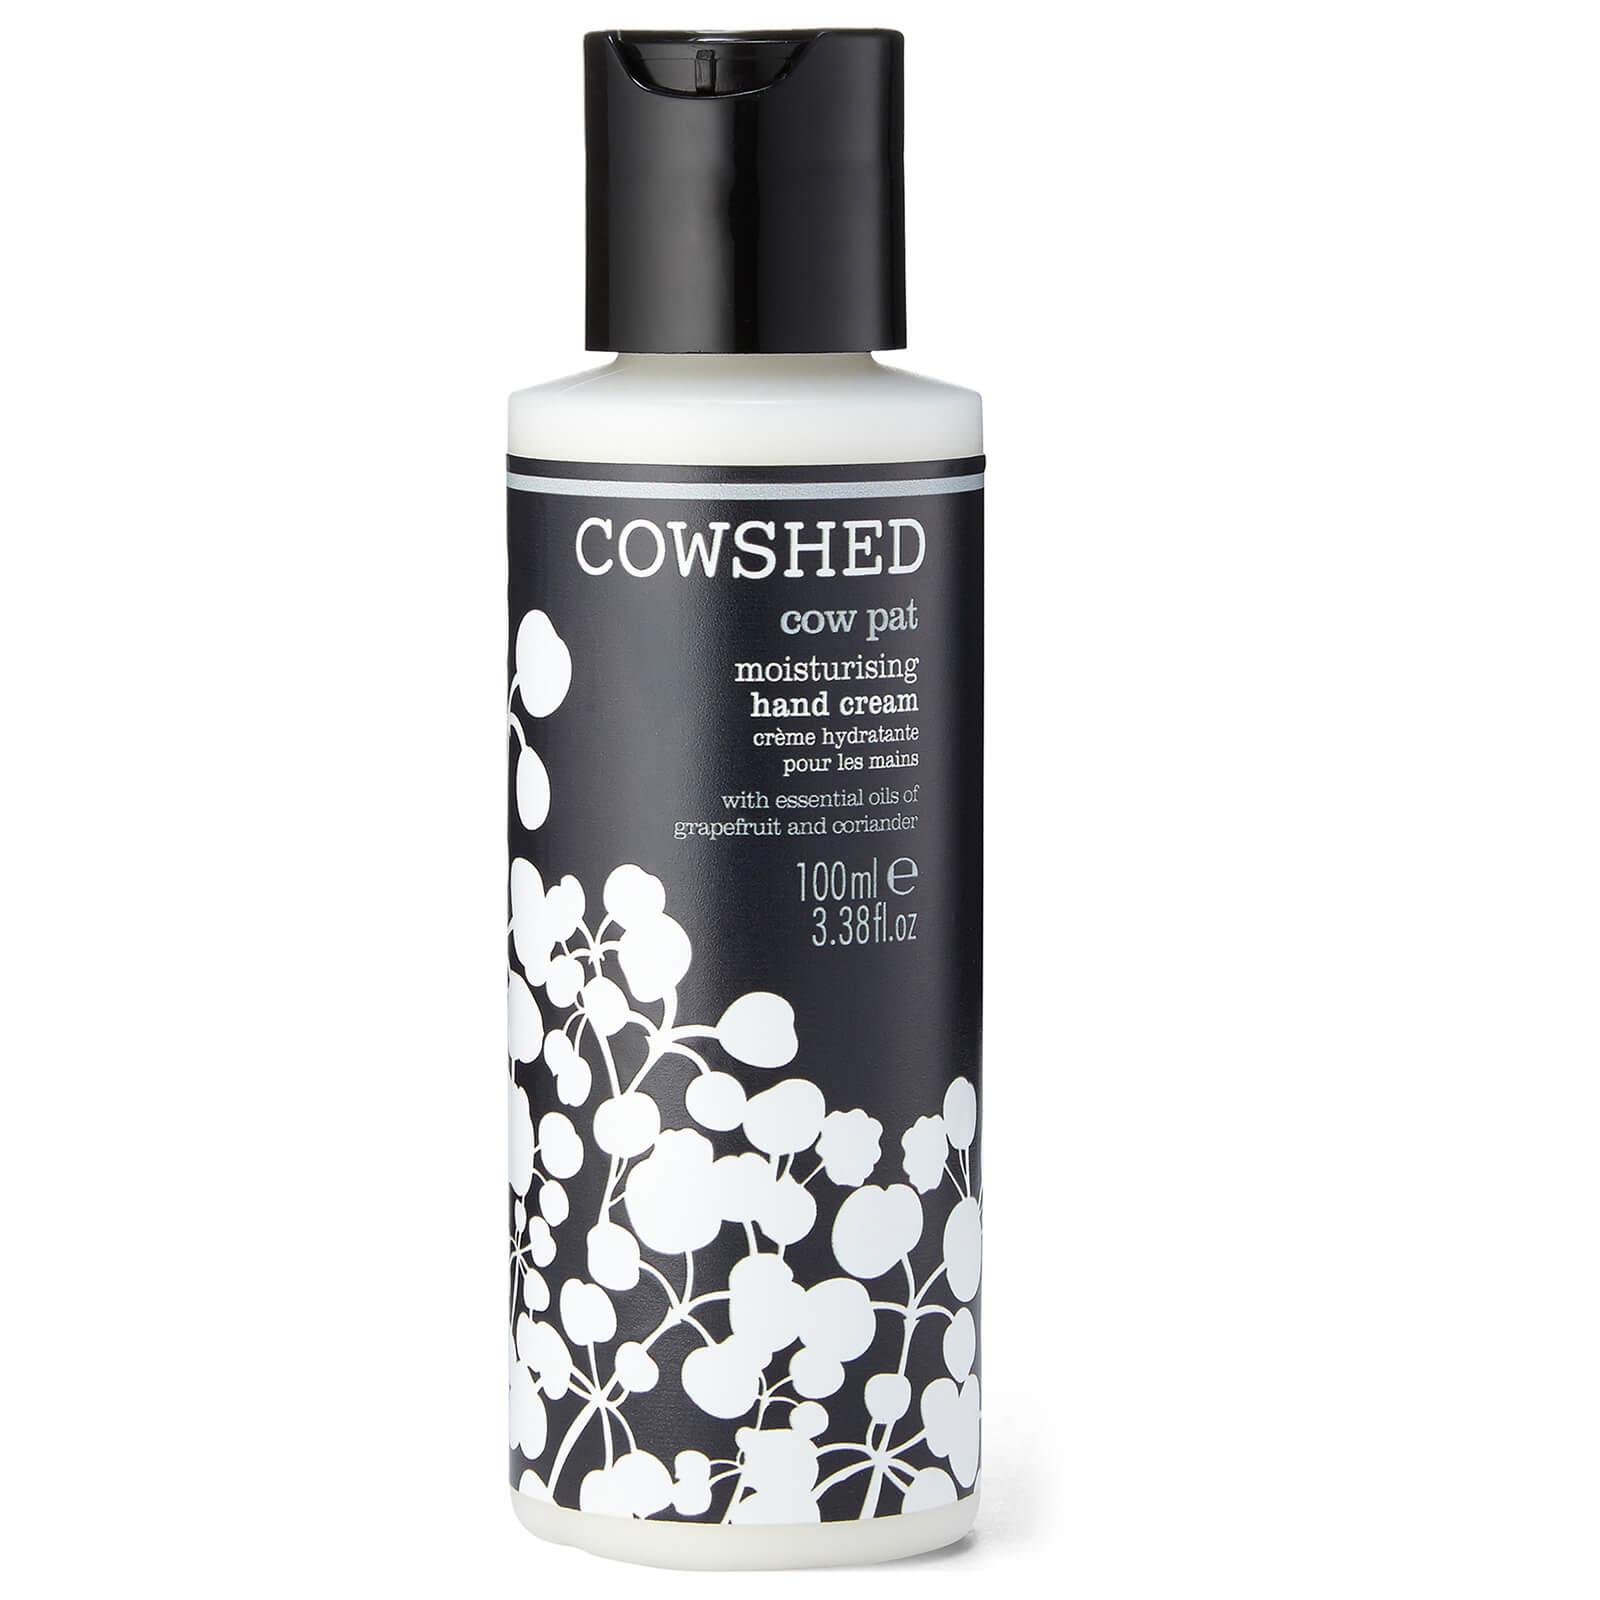 Cowshed Cow Pat Hand Cream Beauty Box